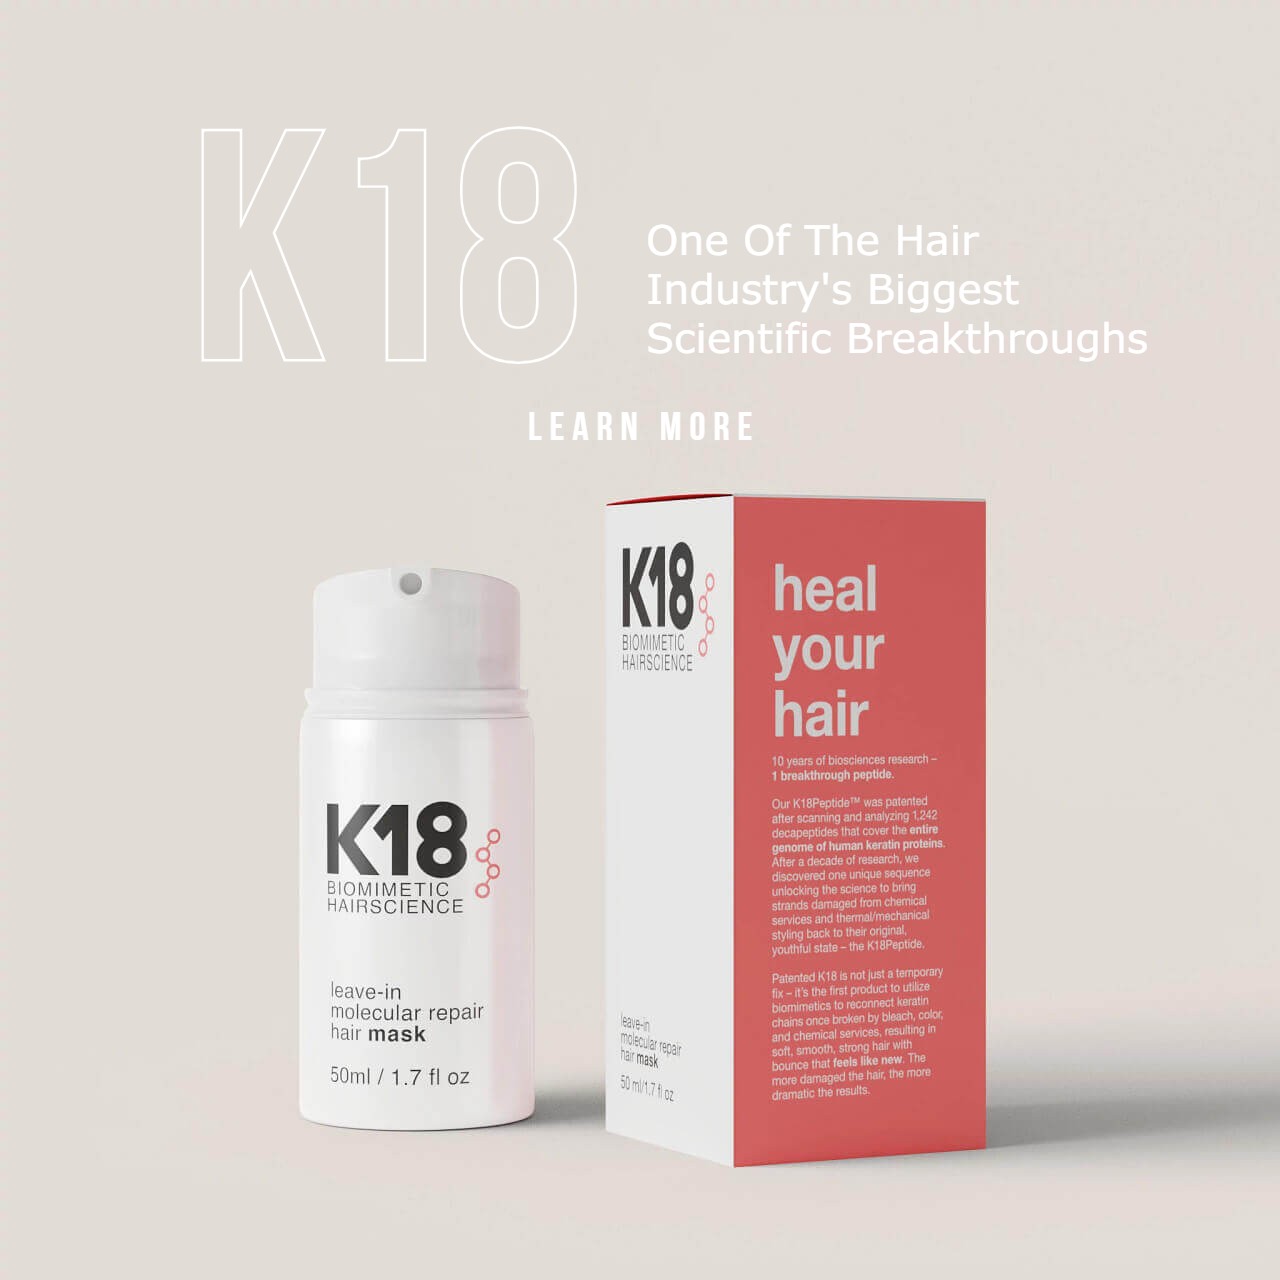 Discover the science behind K18